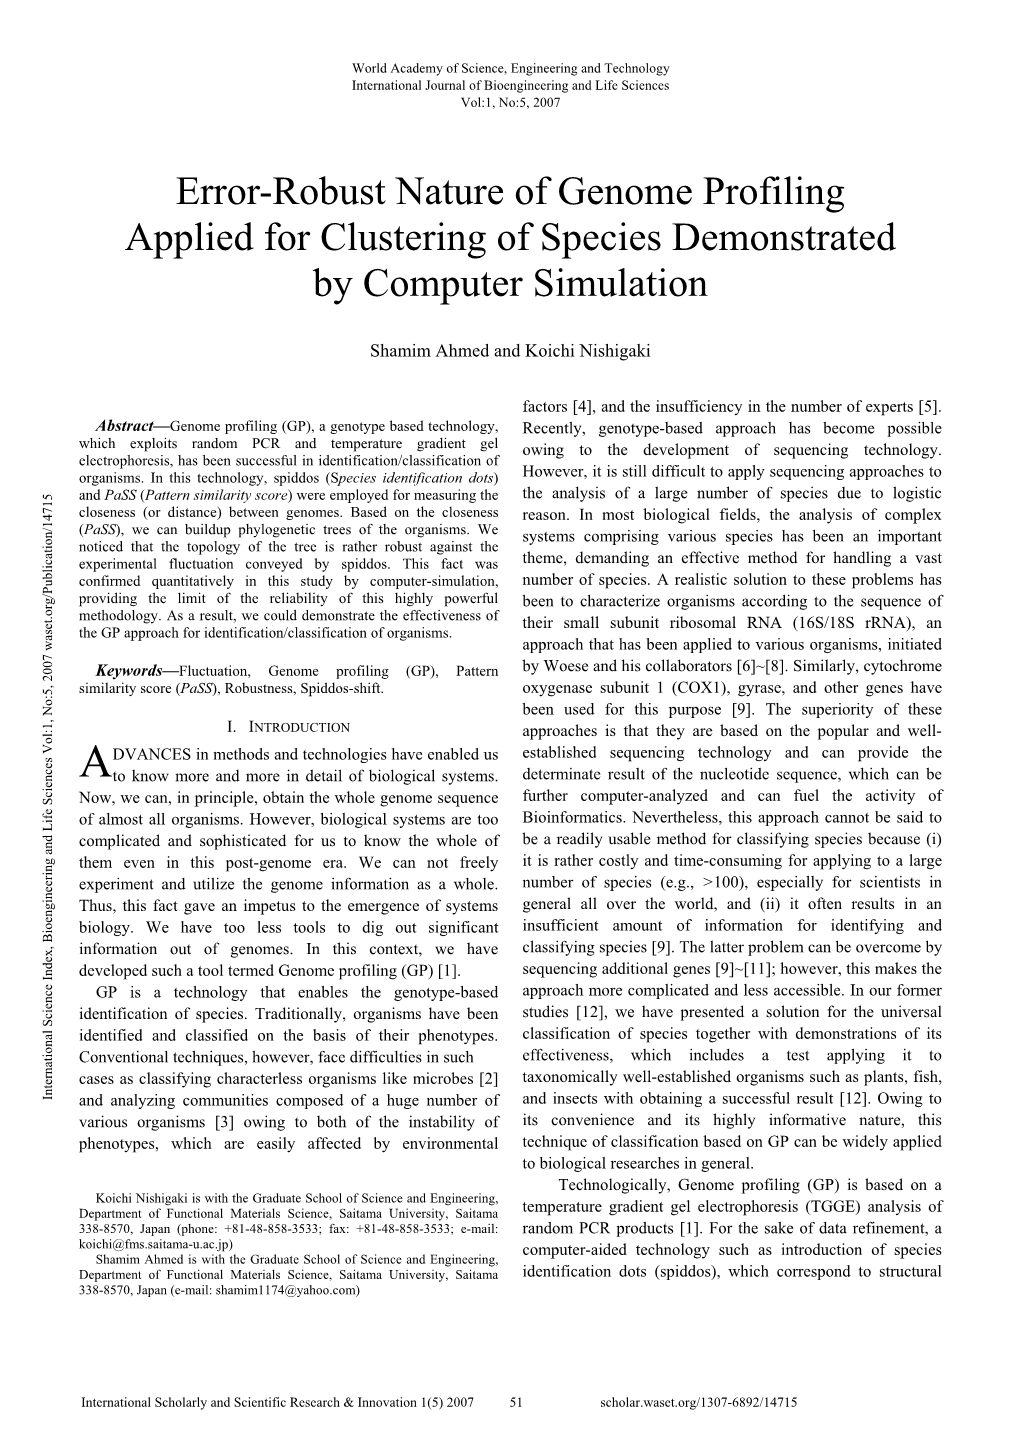 Error-Robust Nature of Genome Profiling Applied for Clustering of Species Demonstrated by Computer Simulation